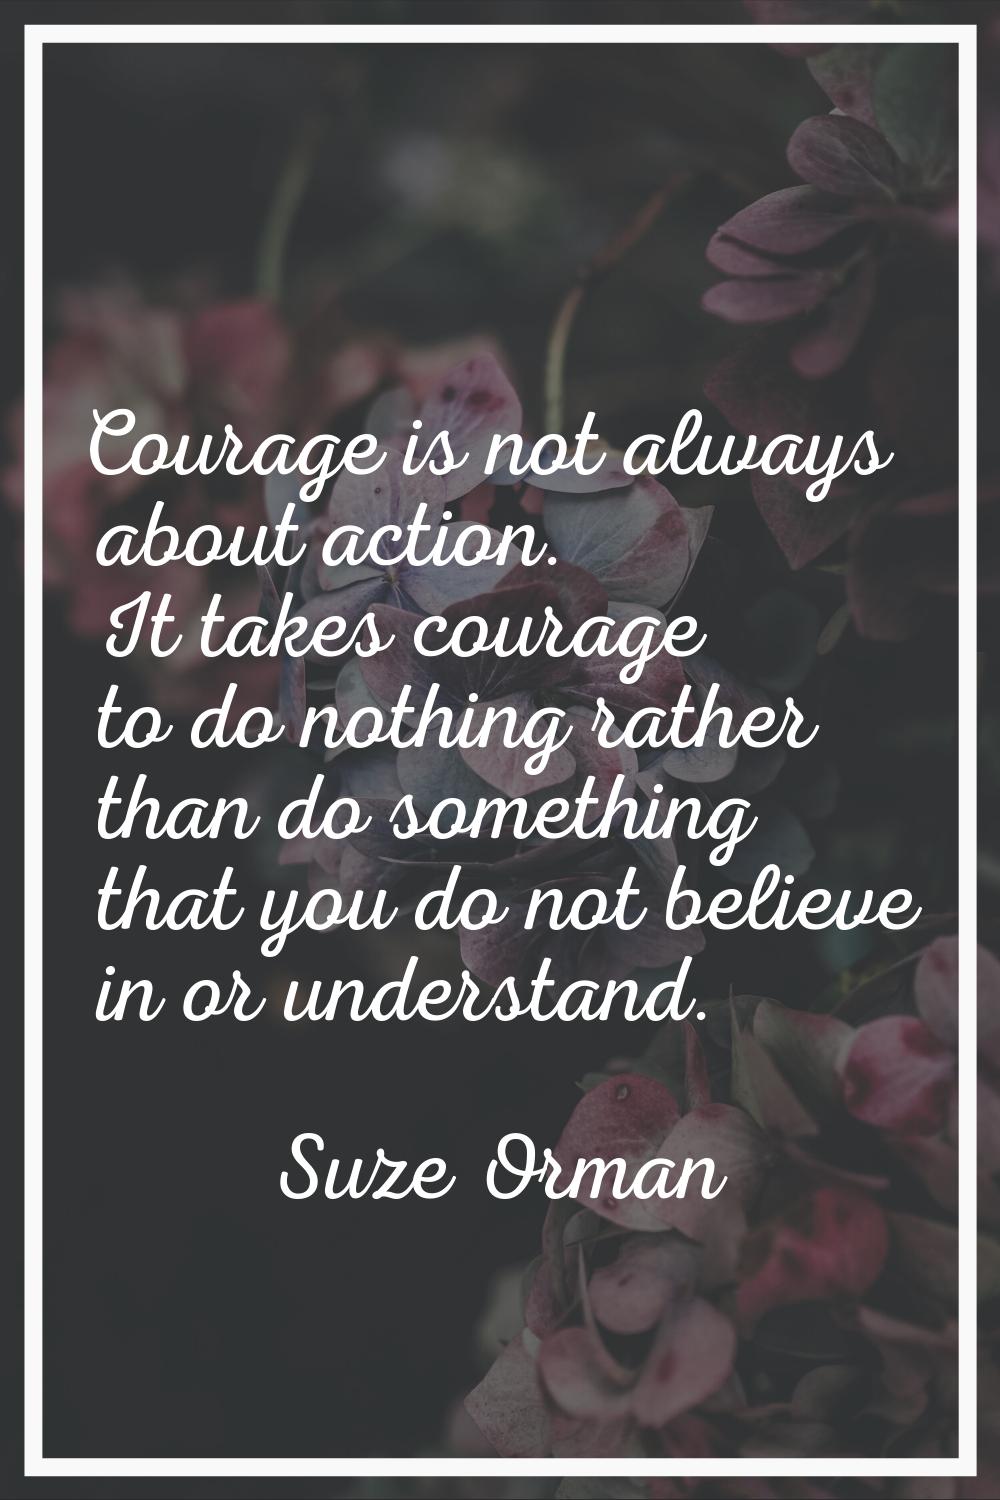 Courage is not always about action. It takes courage to do nothing rather than do something that yo